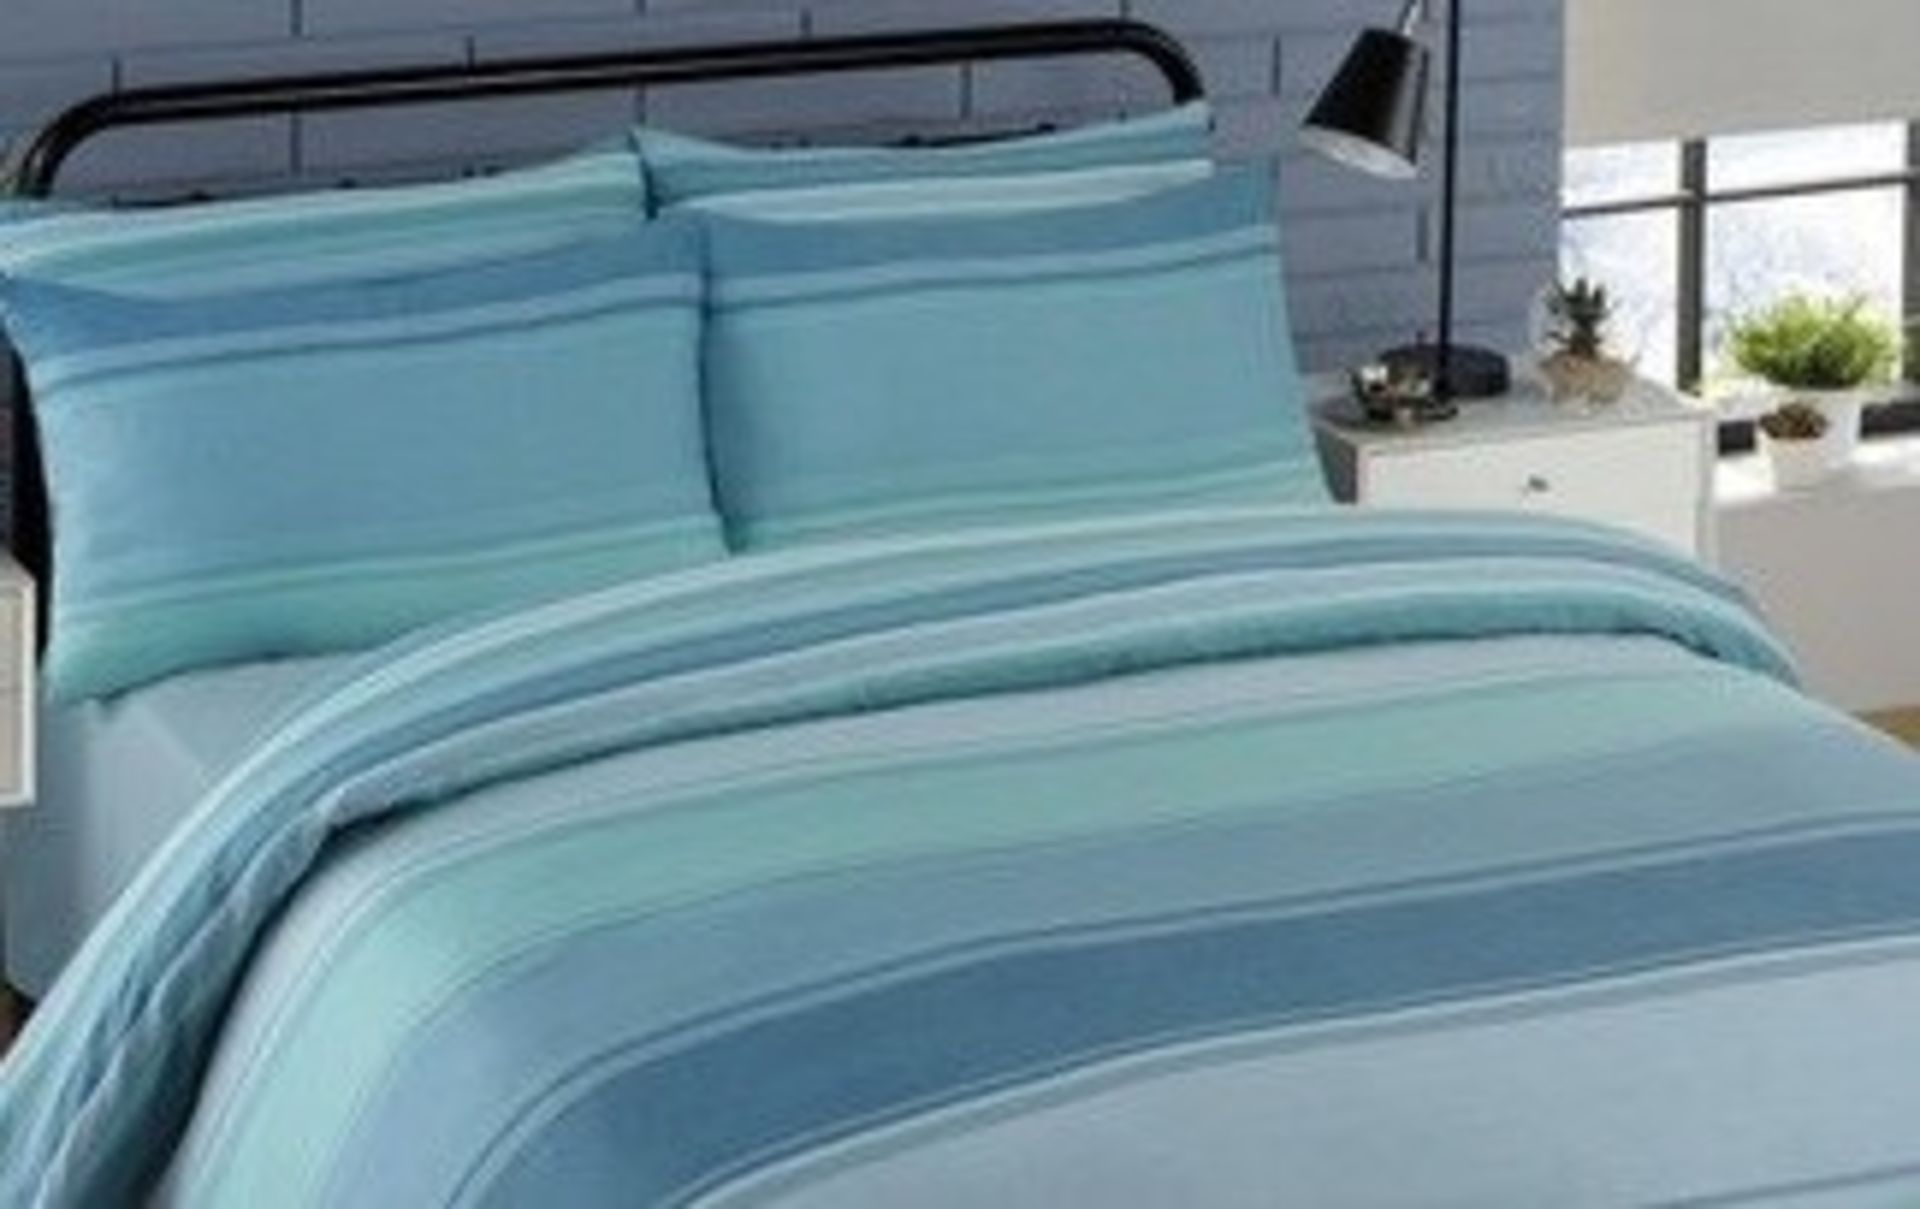 1 AS NEW BAGGED BENTLEY SINGLE DUVET SET IN TEAL (VIEWING HIGHLY RECOMMENDED)